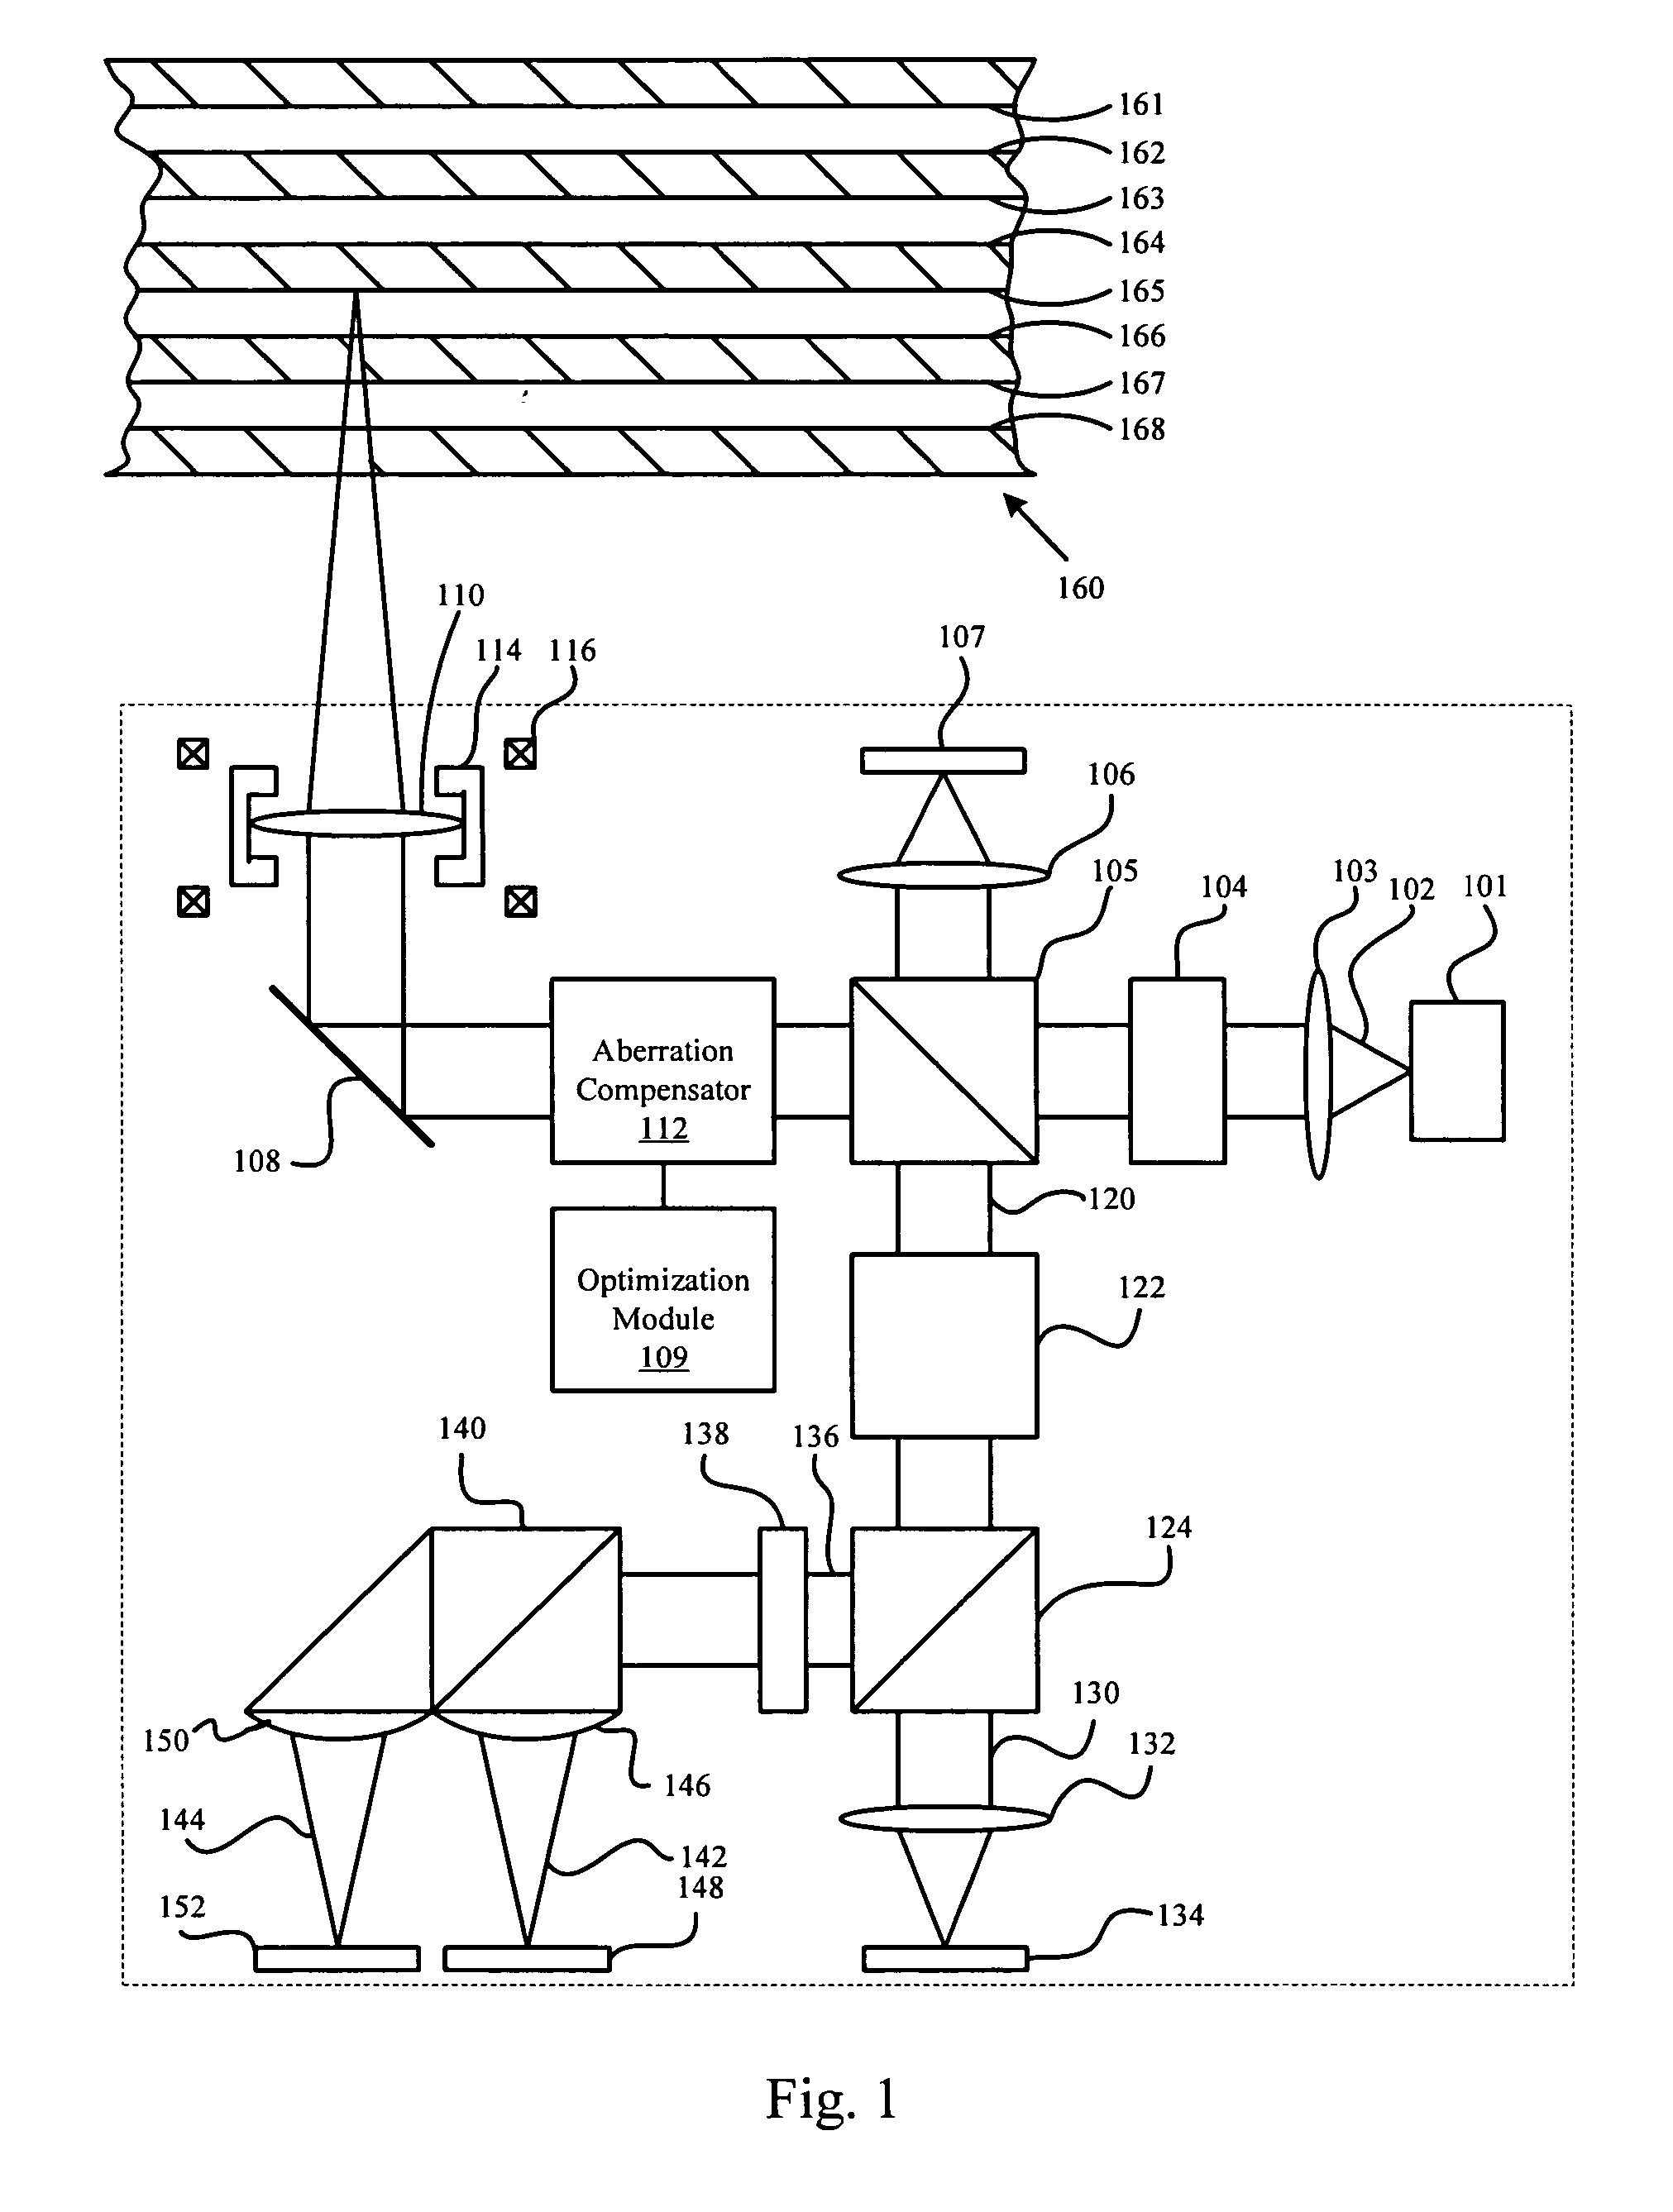 Multi-layered media aberration compensation apparatus, method, and system